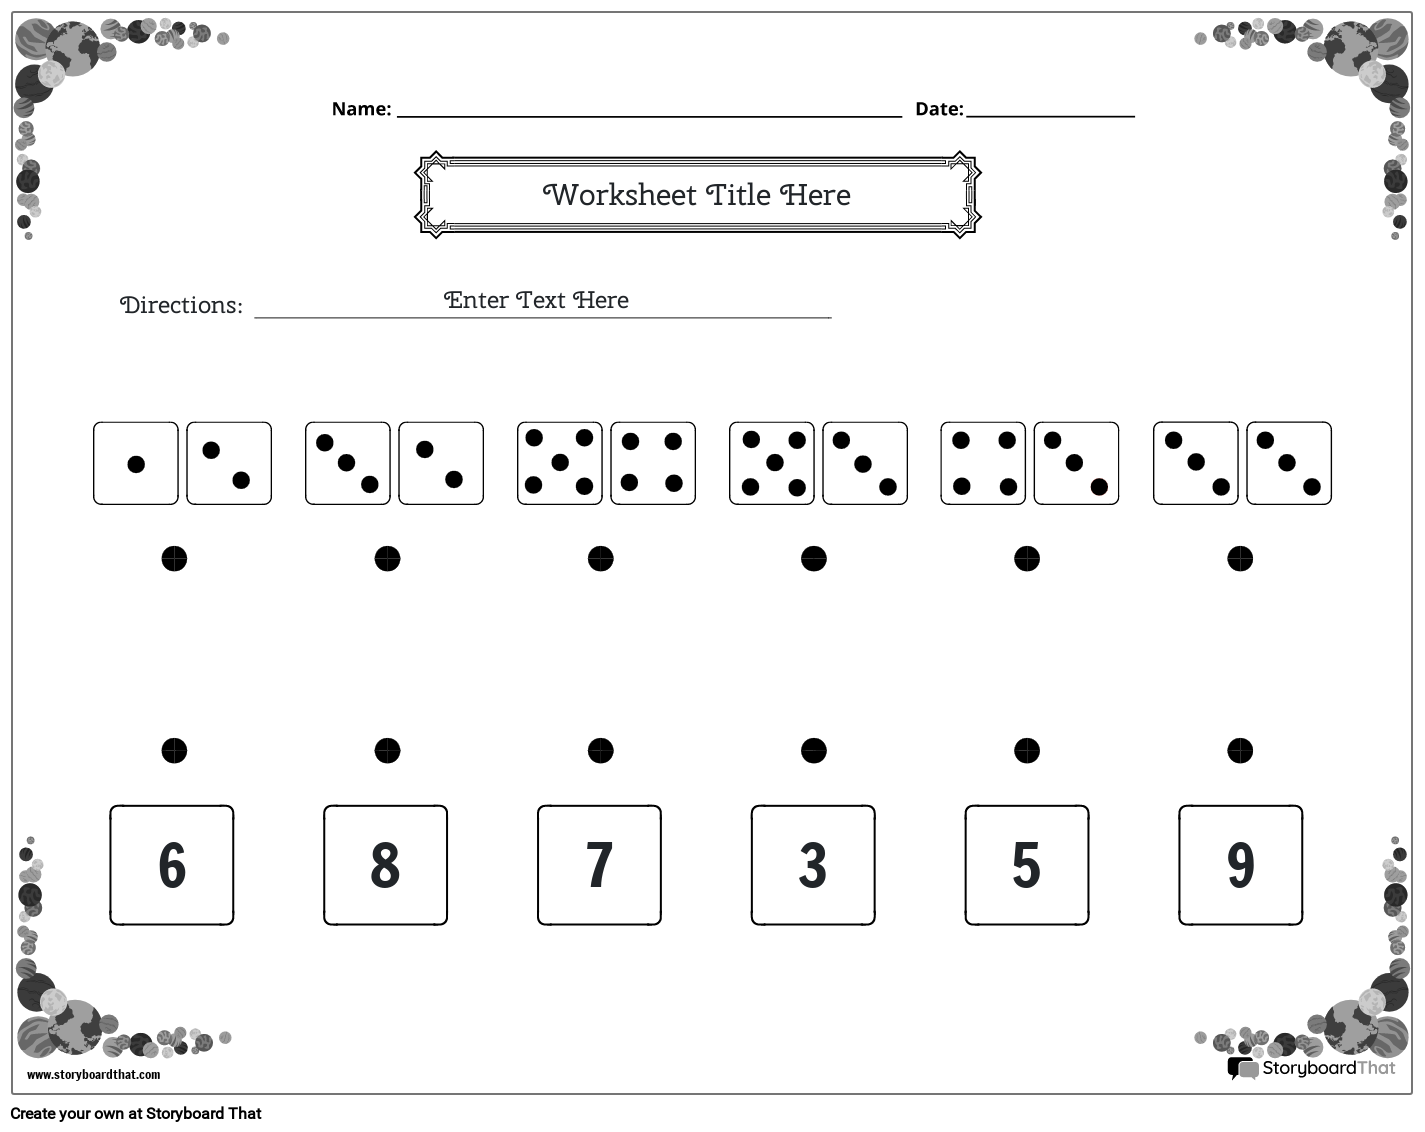 Dies match and count worksheet (black & white)